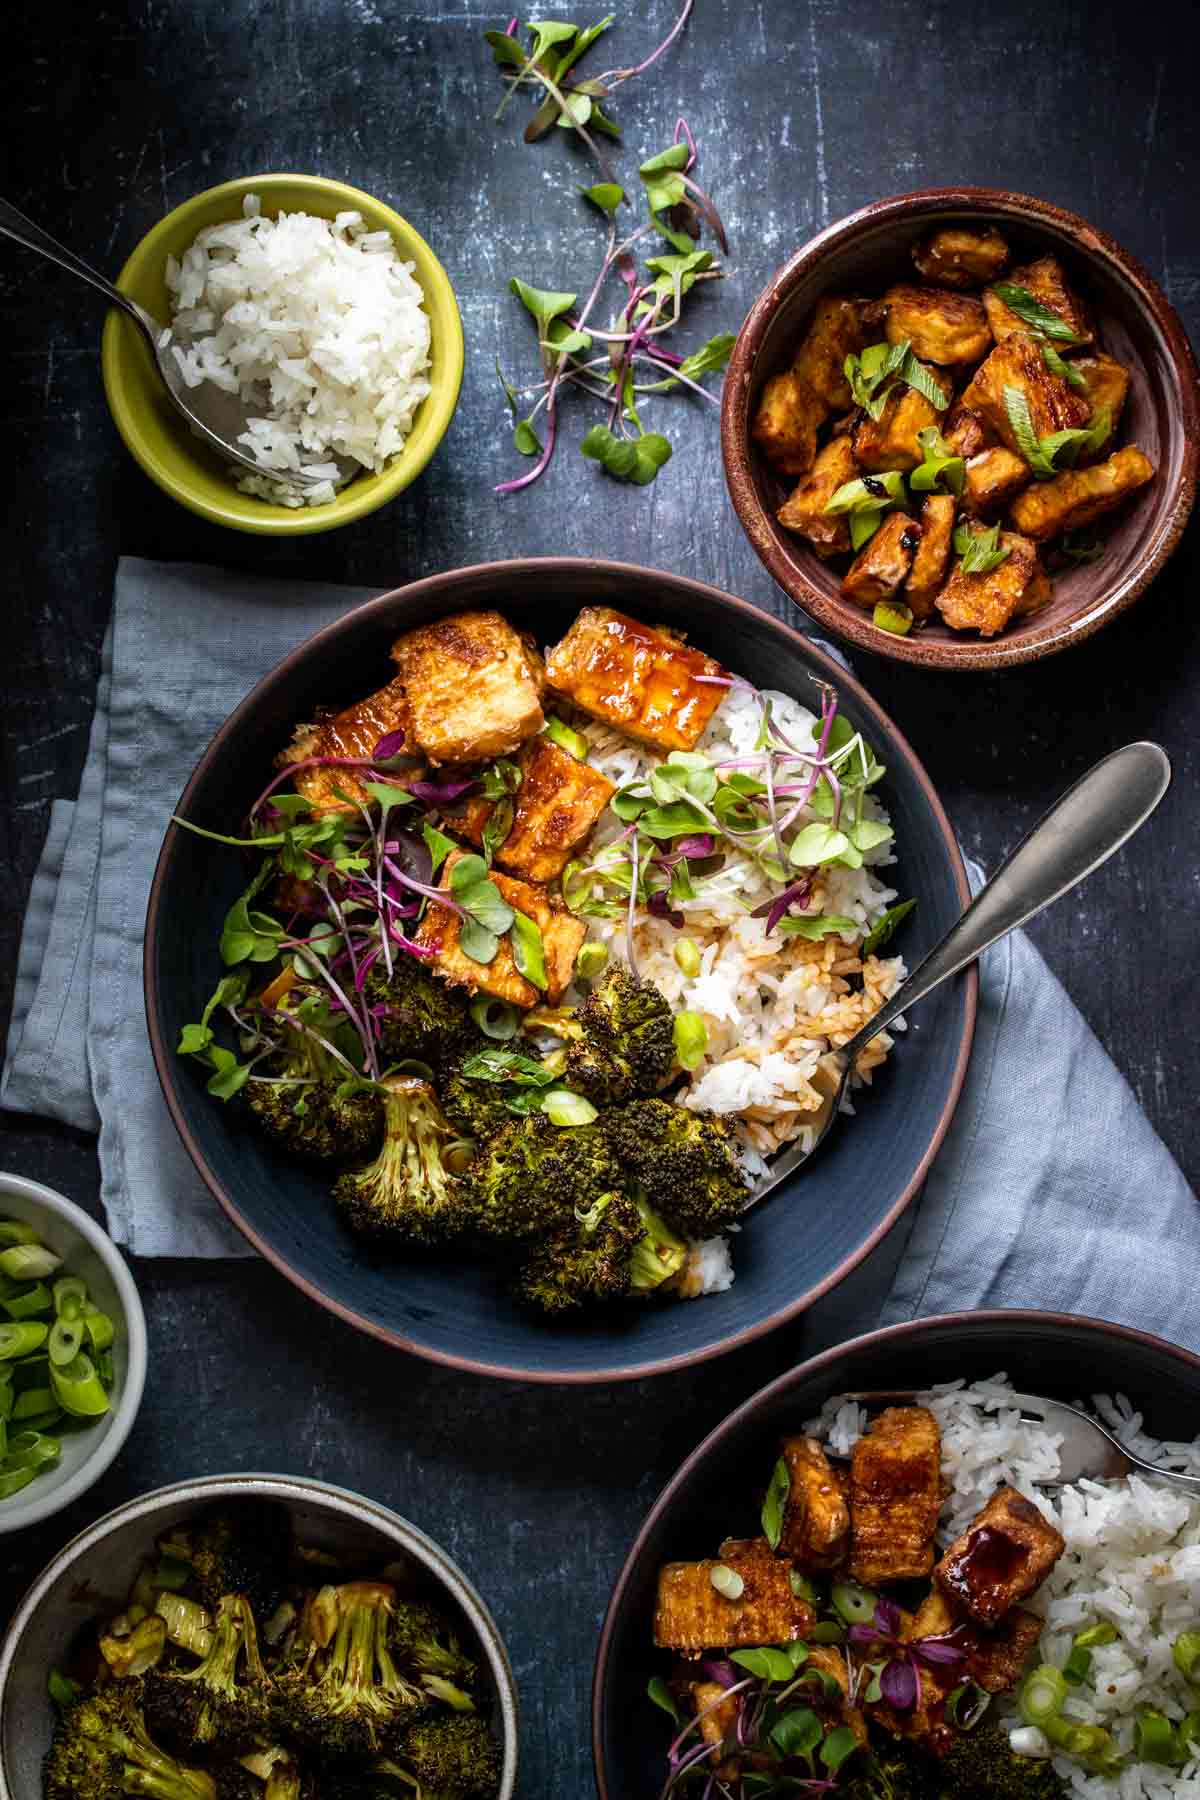 A fork in a bowl of rice, broccoli and crispy tofu with teriyaki sauce over it